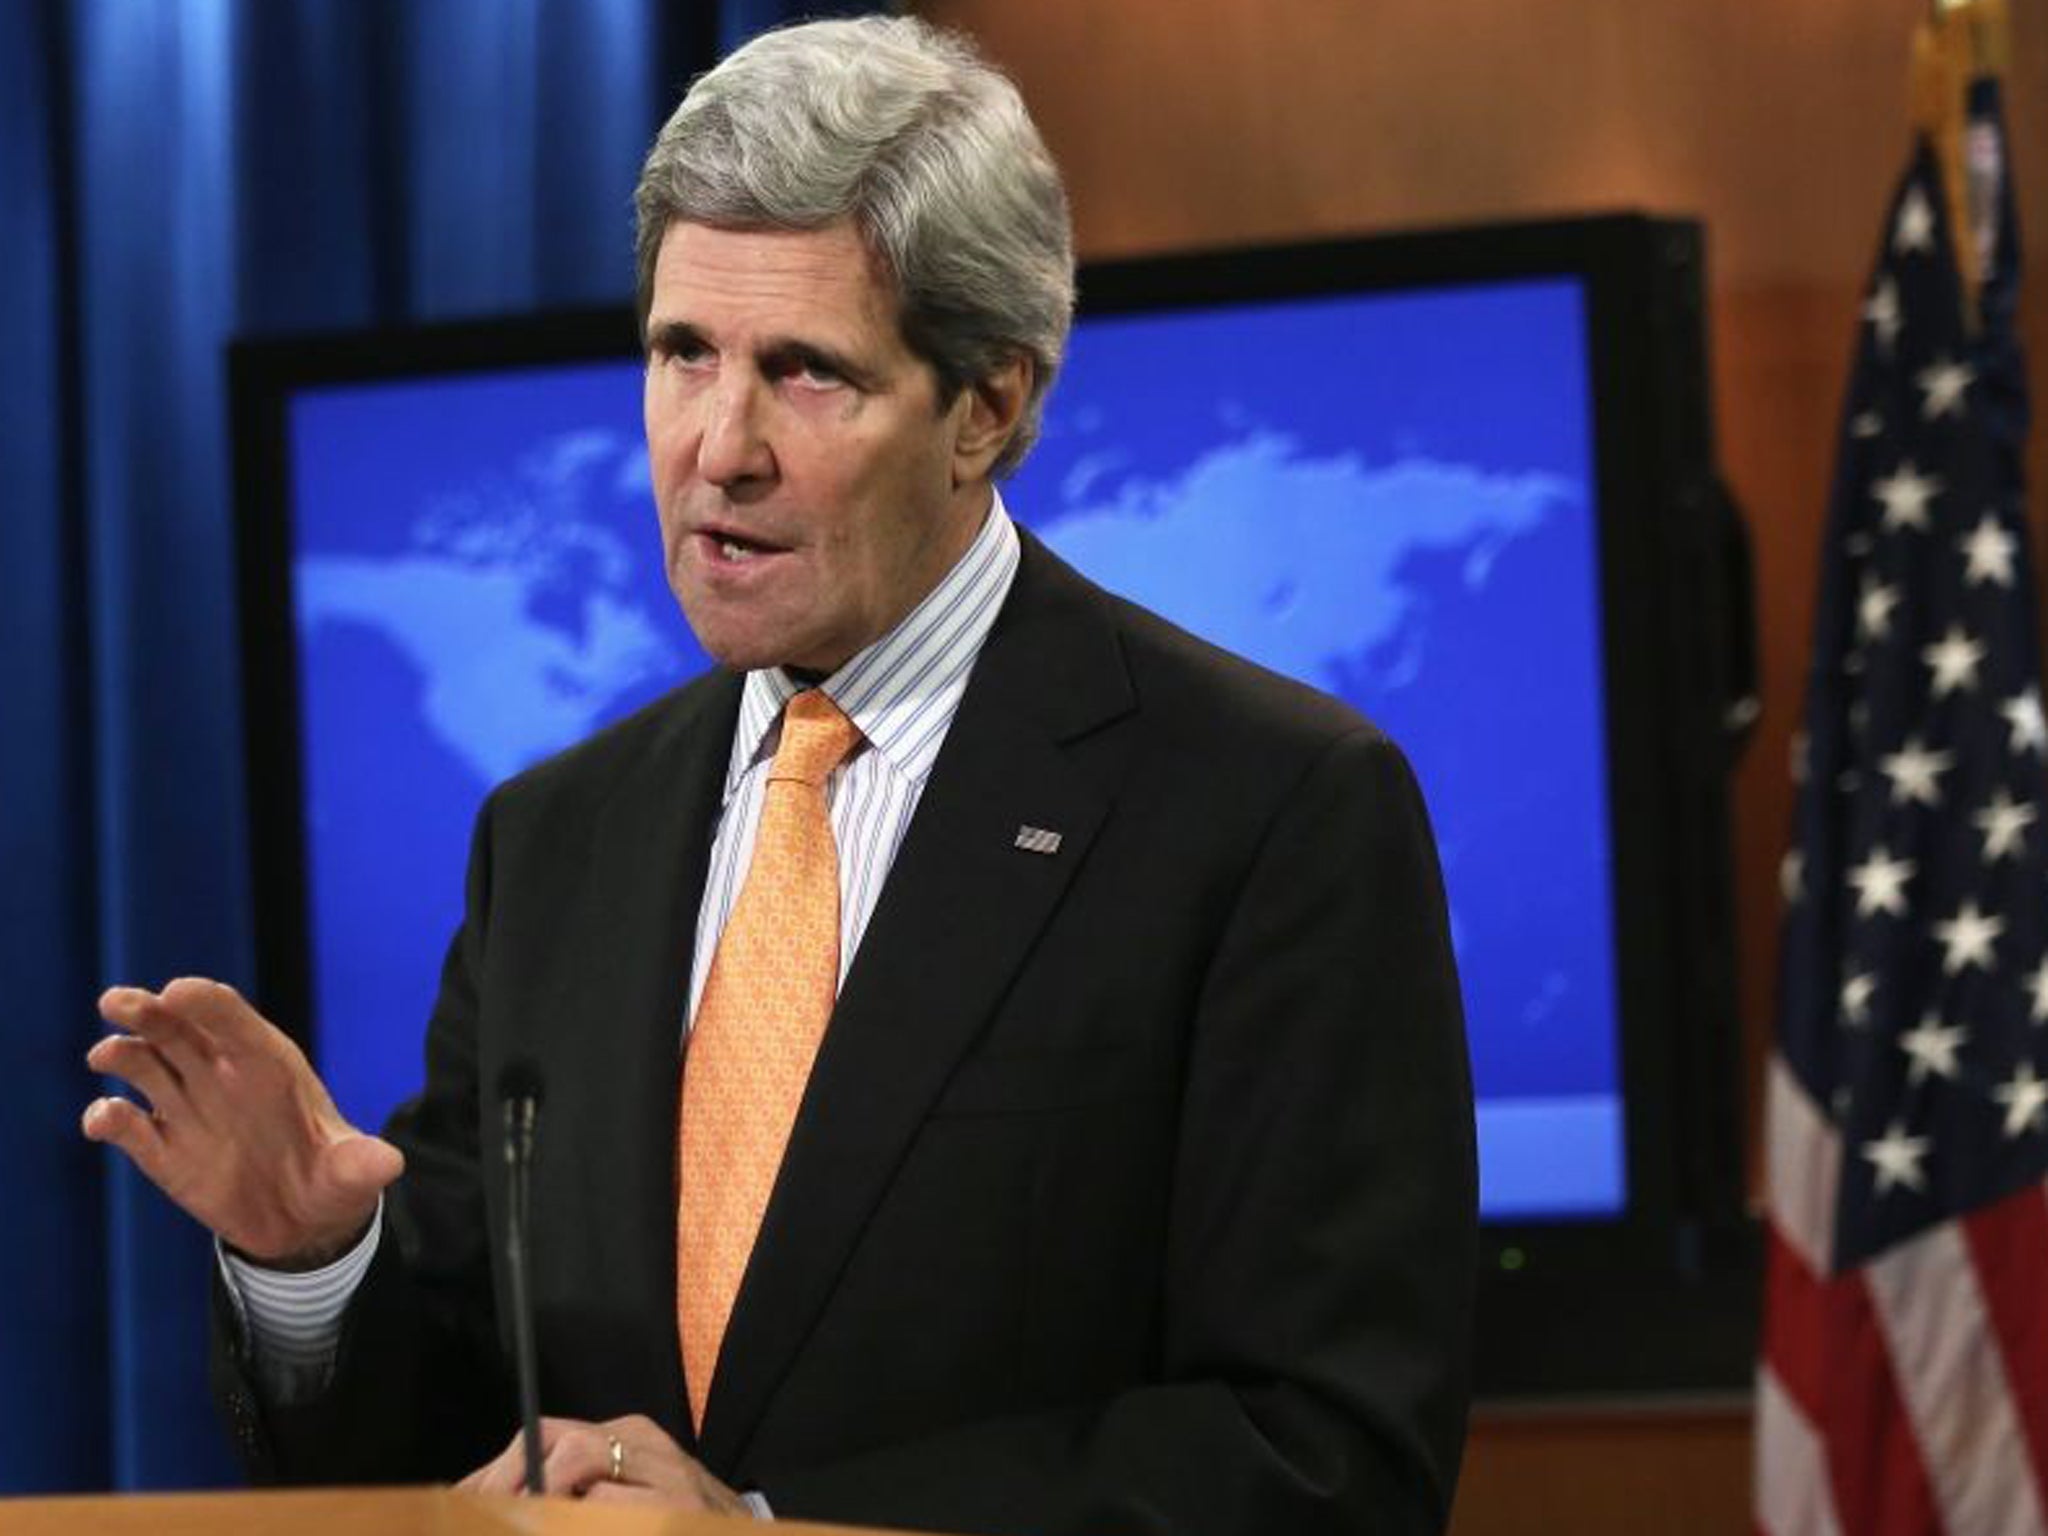 John Kerry makes a statement on Syria at the State Department